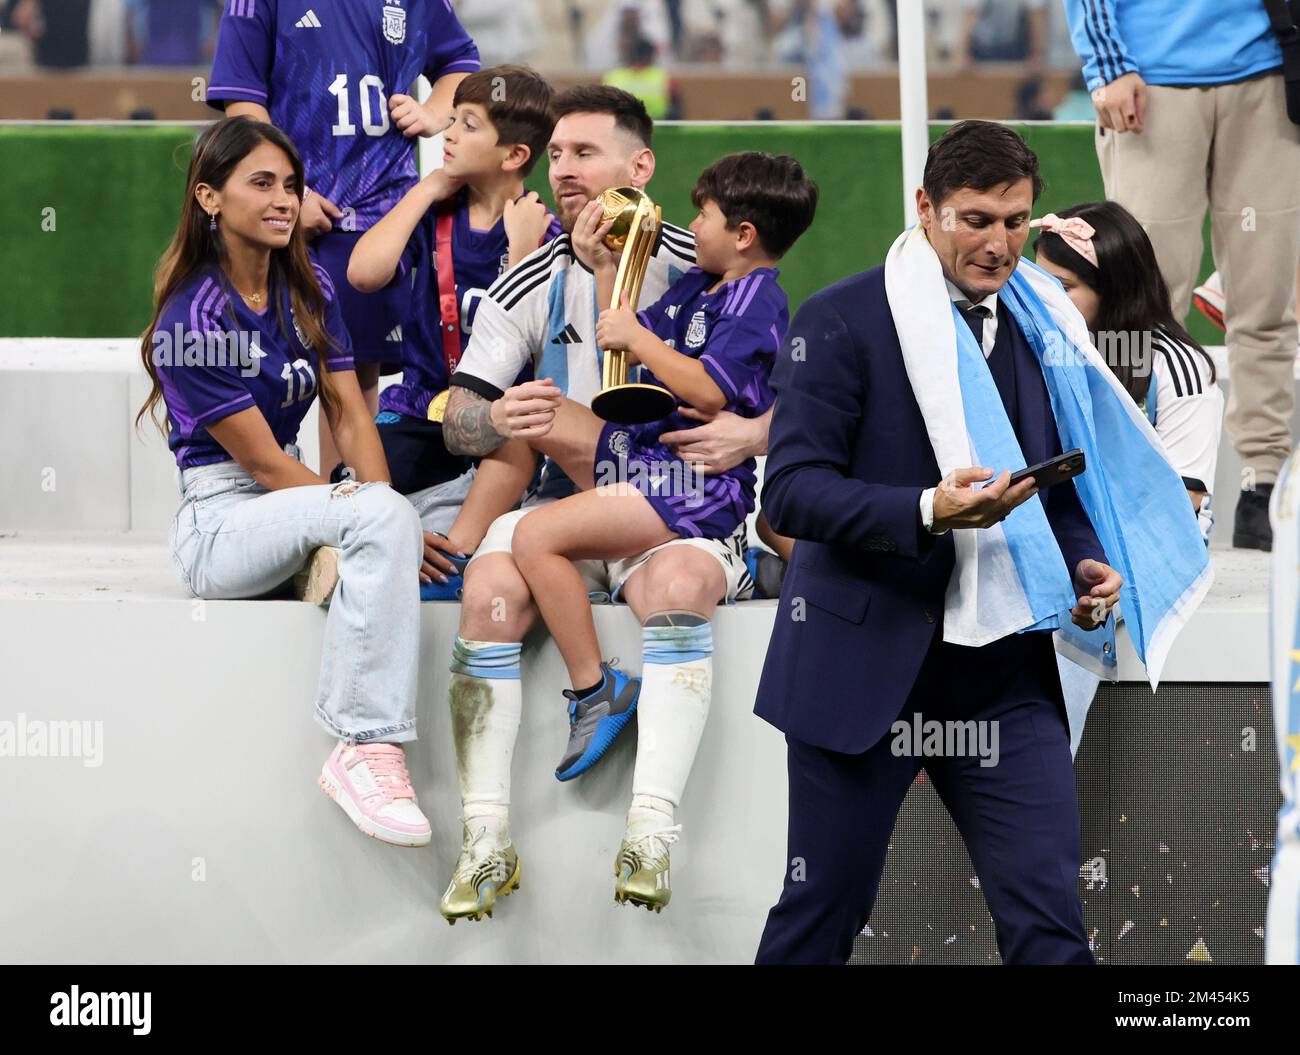 Qatar - 18/12/2022, Lionel Messi of Argentina with his wife Antonella Roccuzzo and their sons, right former player Javier Zanetti following the FIFA World Cup 2022, Final football match between Argentina and France on December 18, 2022 at Lusail Stadium in Al Daayen, Qatar - Photo Jean Catuffe / DPPI Stock Photo